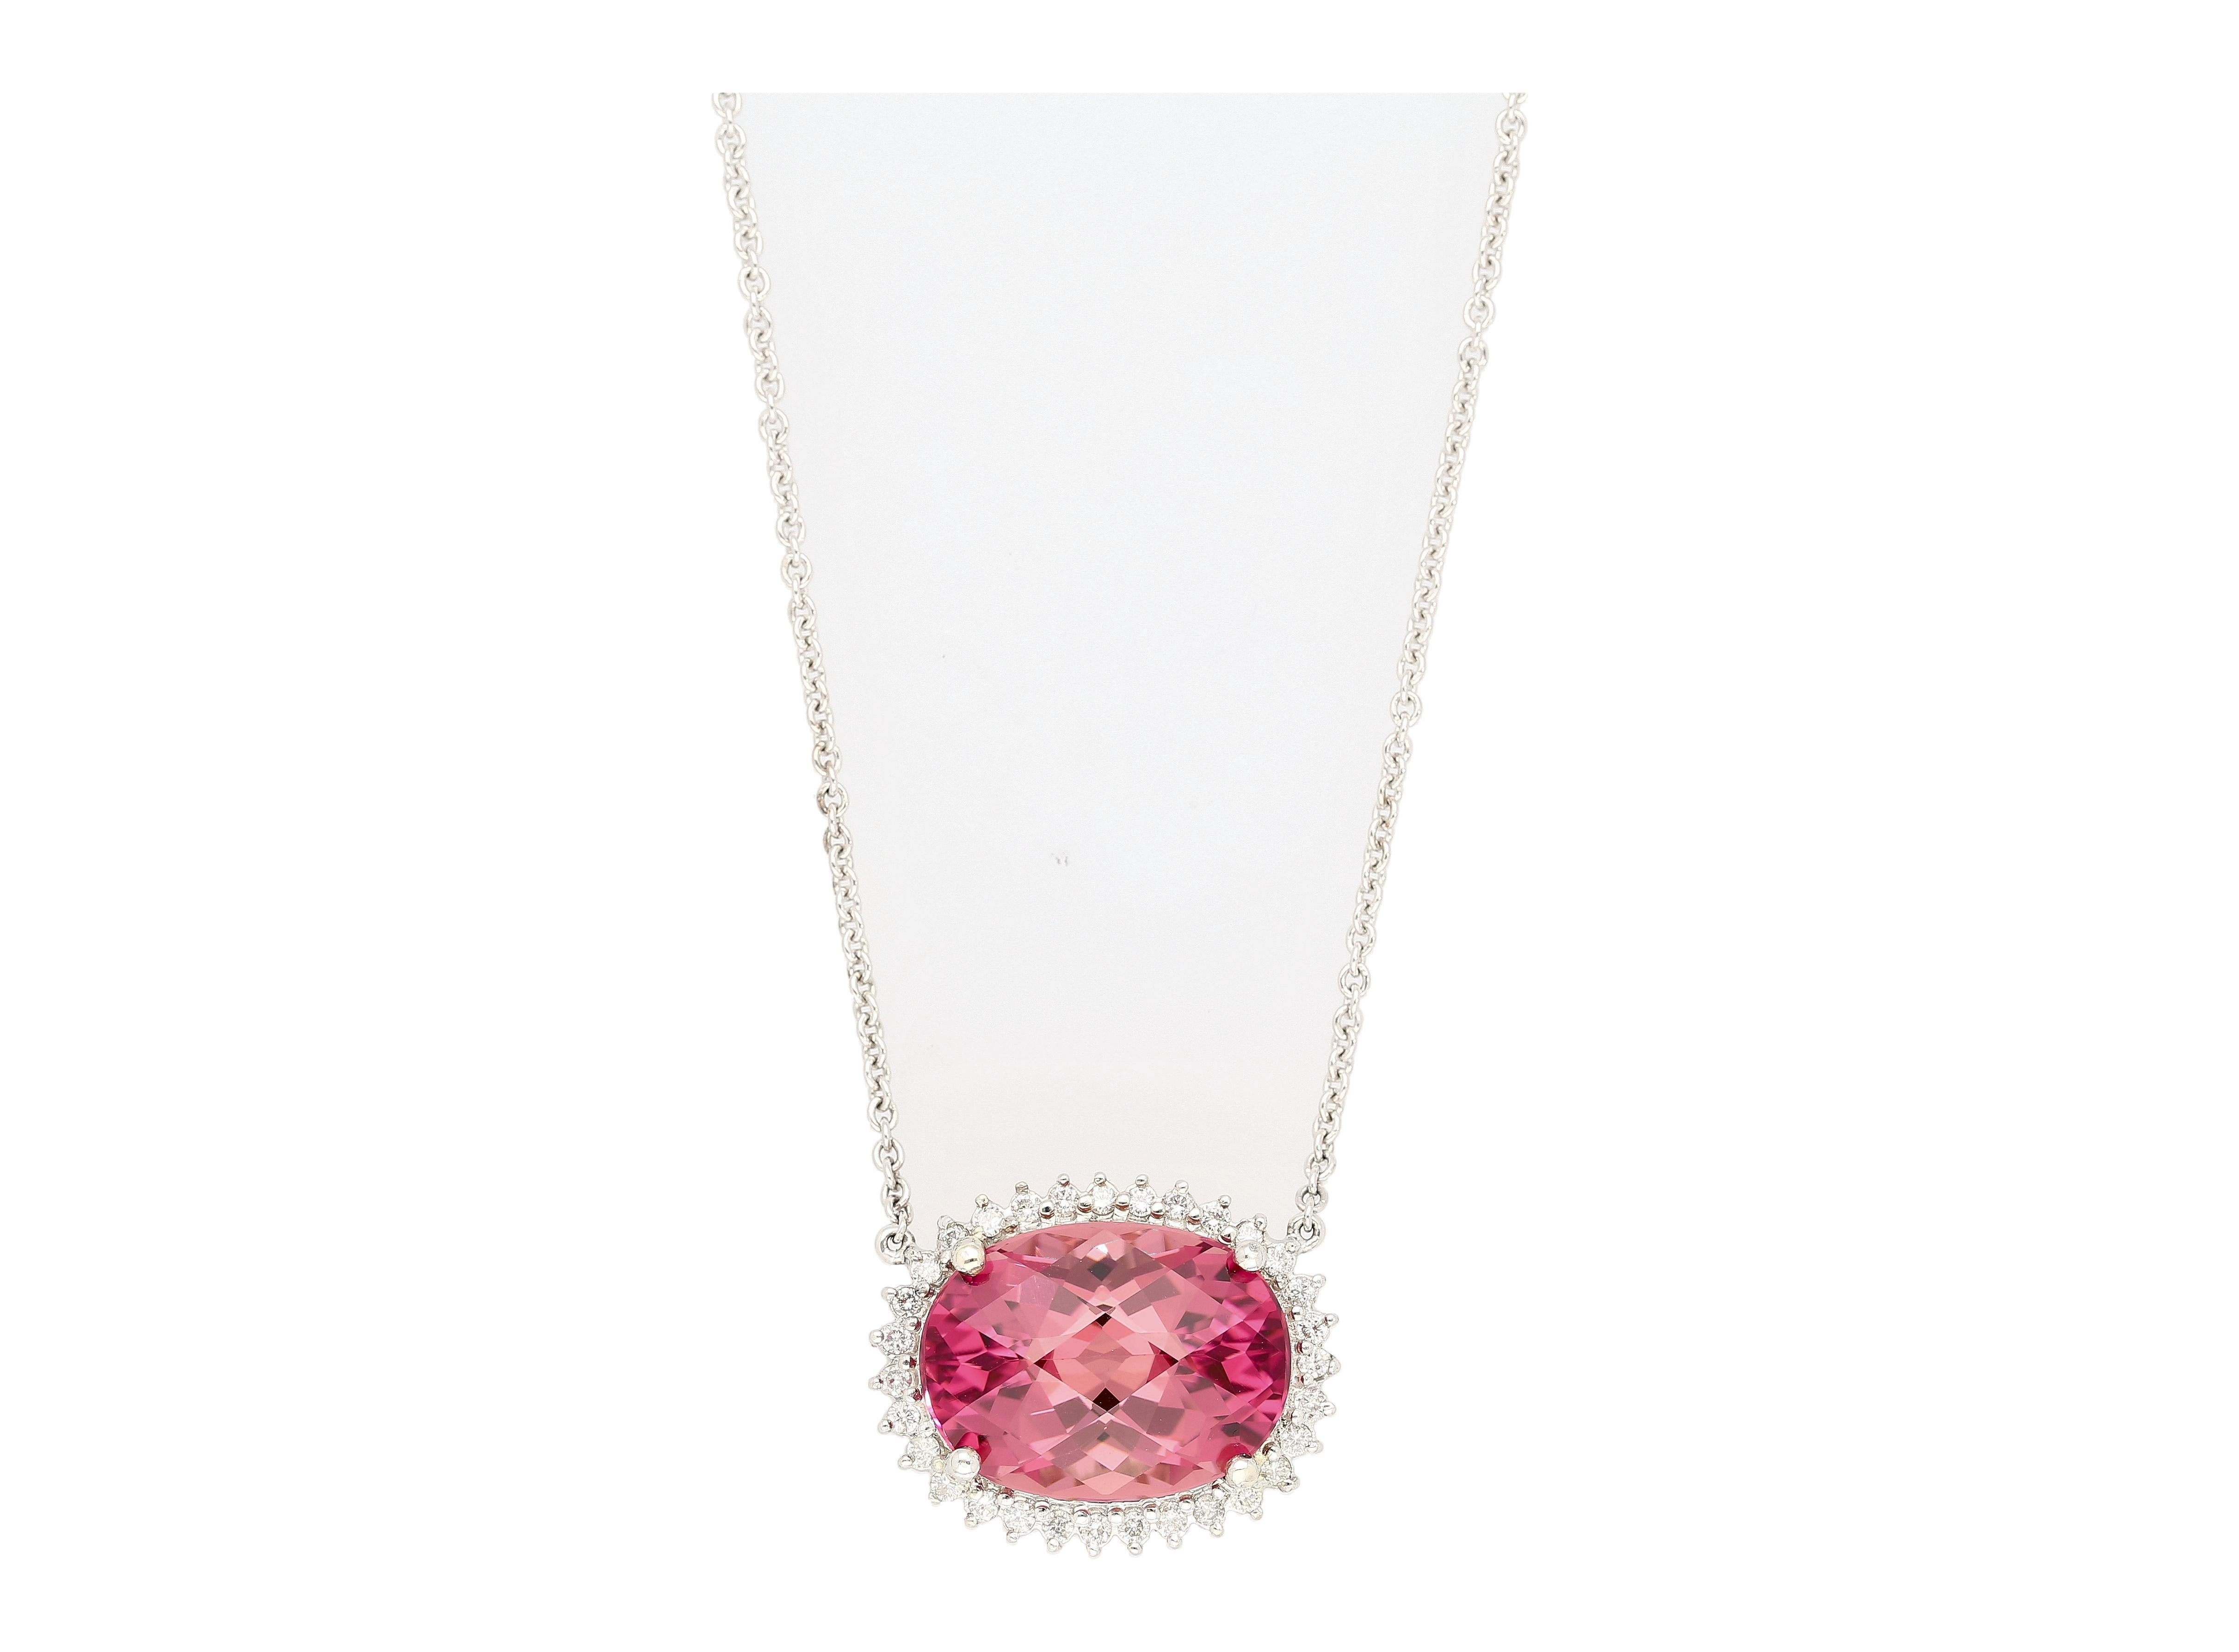 Natural Pink Tourmaline & Diamond Halo Floating Pendant Necklace in 14K/18K Gold. 

This chain necklace is crafted from 18k white gold and measures 18 inches in length, weighing 5 grams. The pendant stone is a natural pink tourmaline weighing 21.13